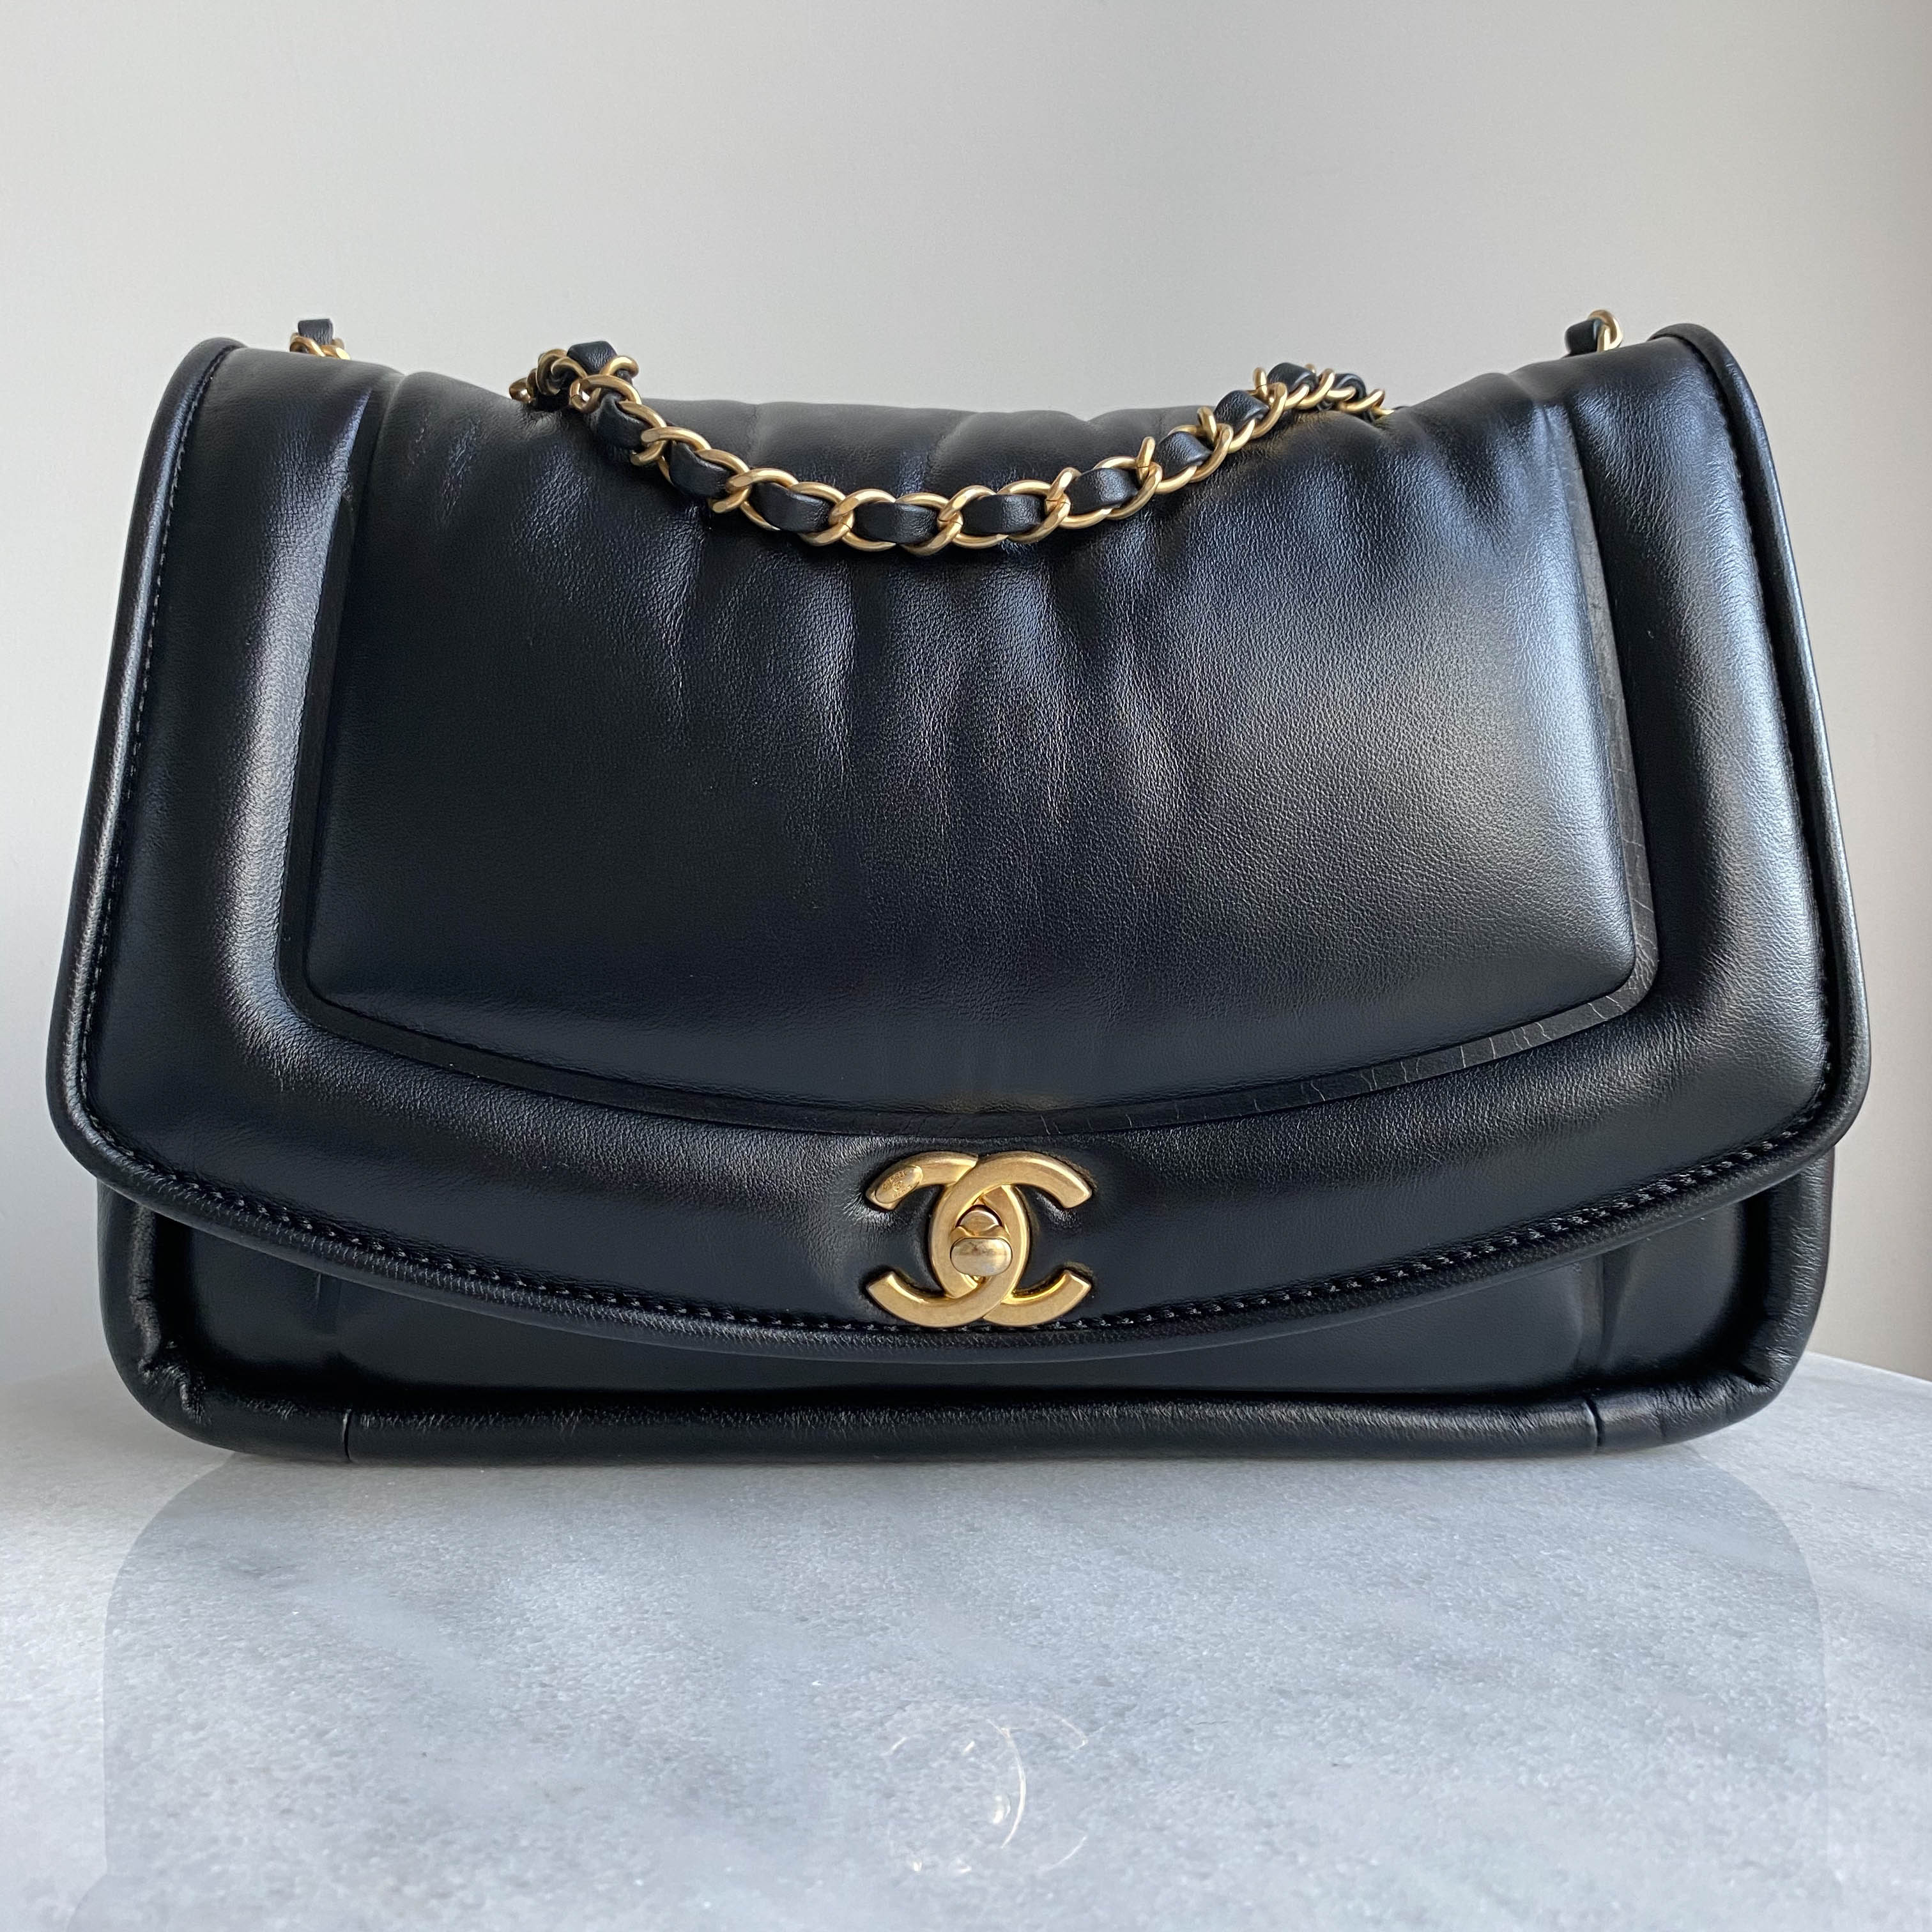 My first Chanel bag! This is the Vintage Puffy Bag #chanelbag #chanelh